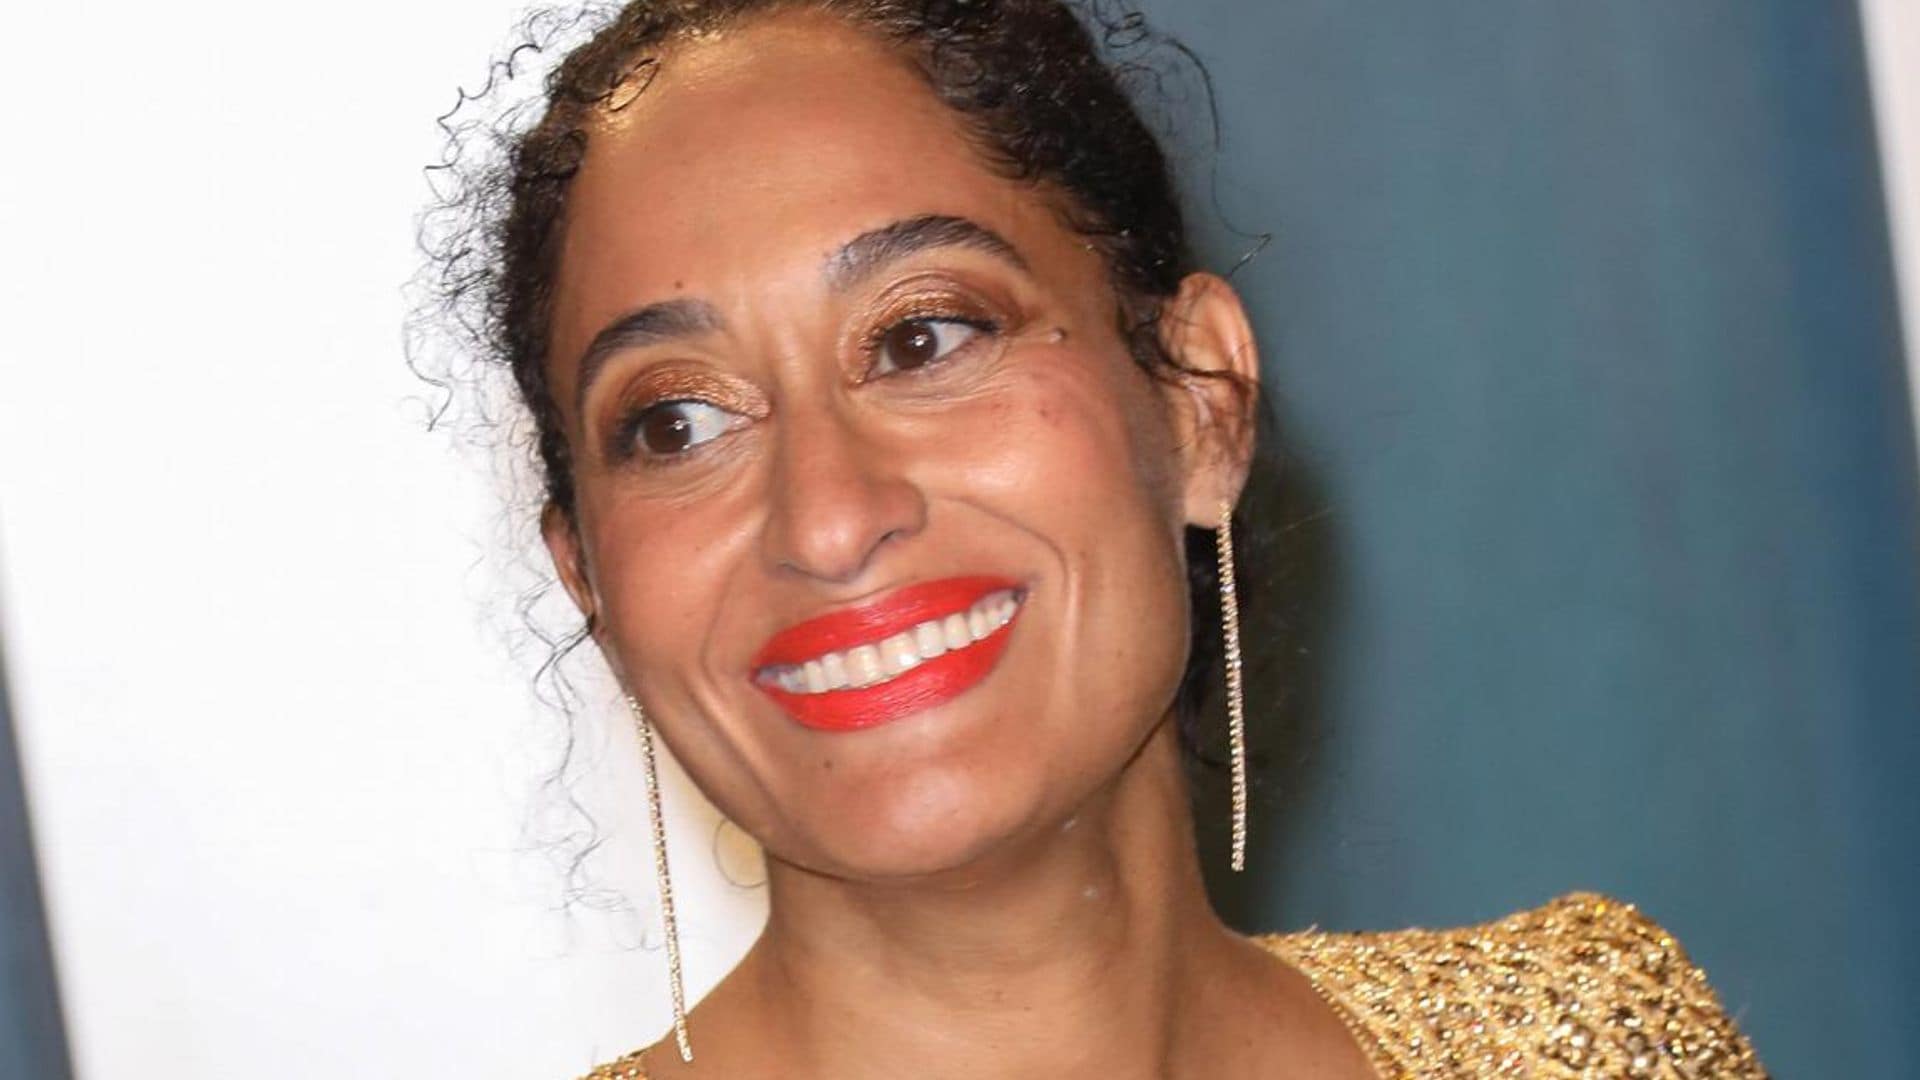 Is Tracee Ellis Ross really dating Harry Styles?